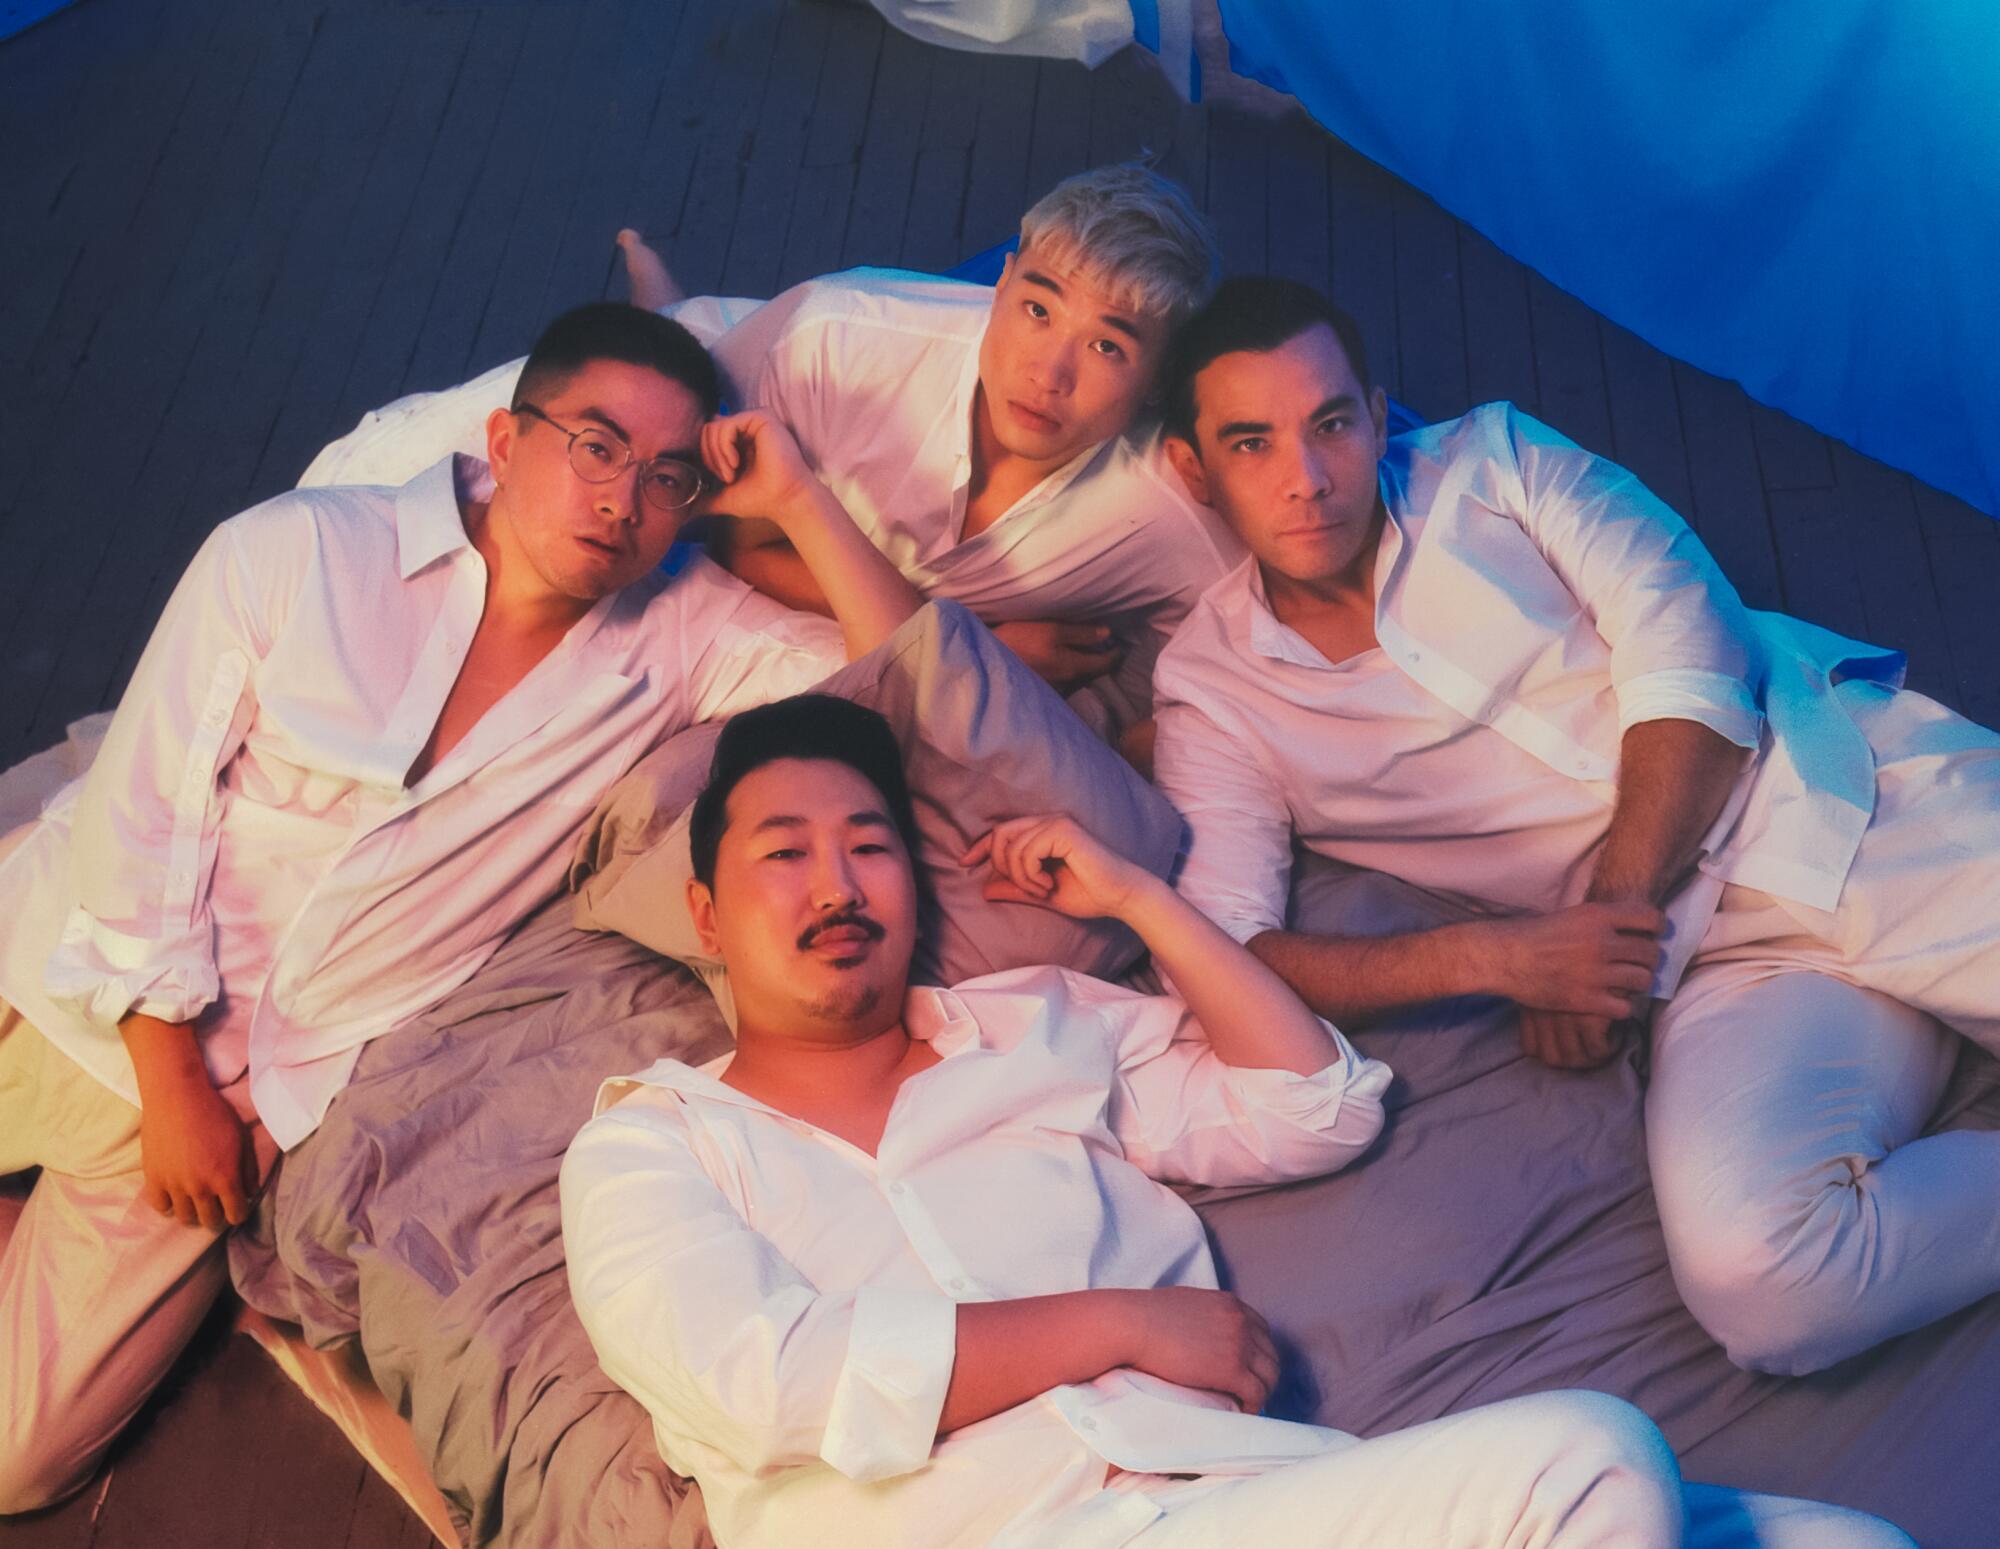 four men in white outfits lay on a bed